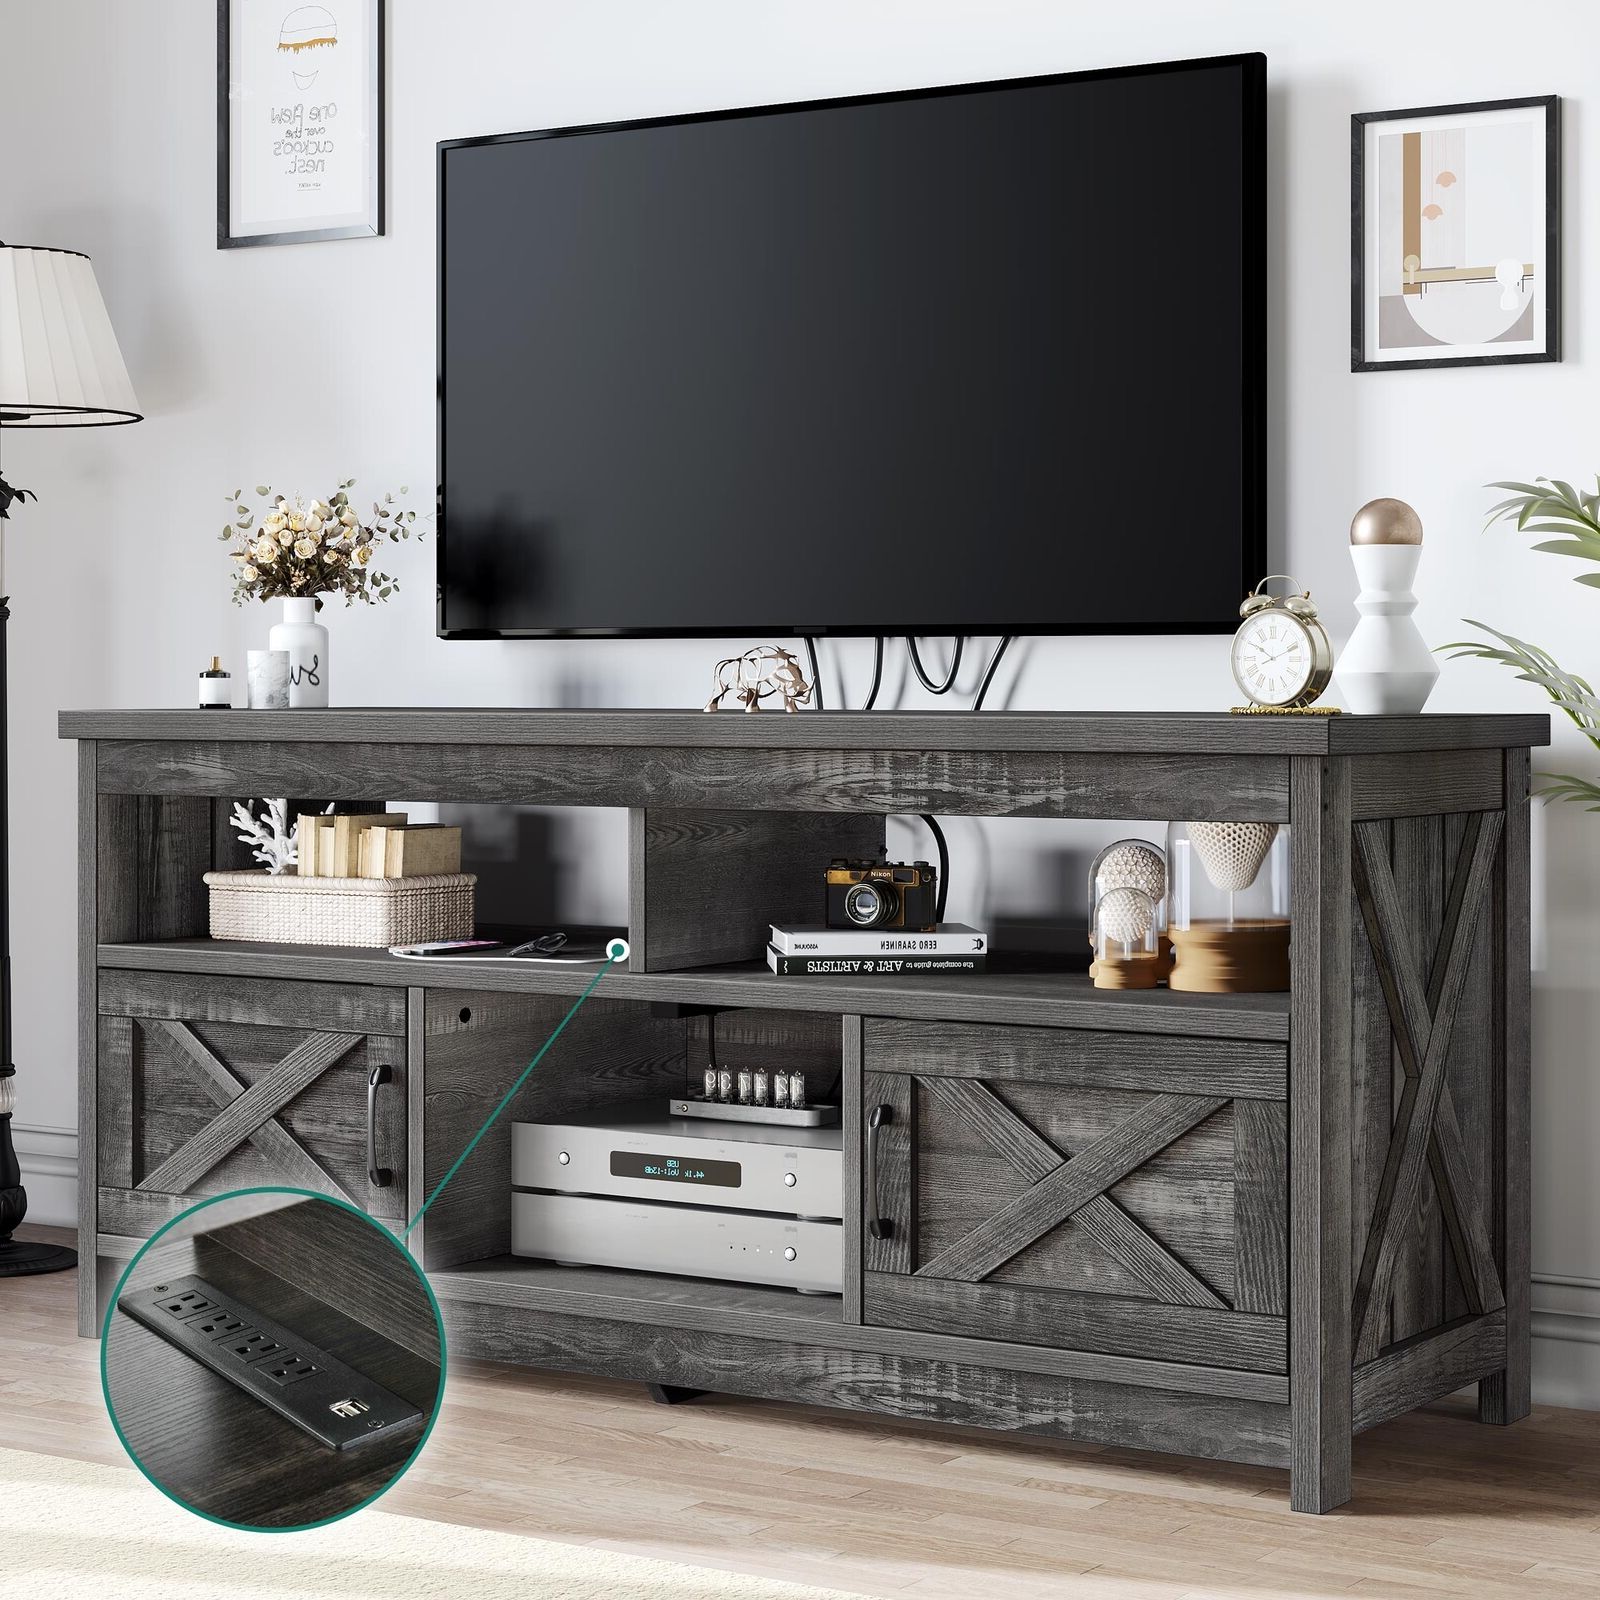 Farmhouse Tv Stand For 65 In With Power Outlet Media Console W/ Storage  Cabinet | Ebay With Regard To Farmhouse Stands With Shelves (Gallery 8 of 20)